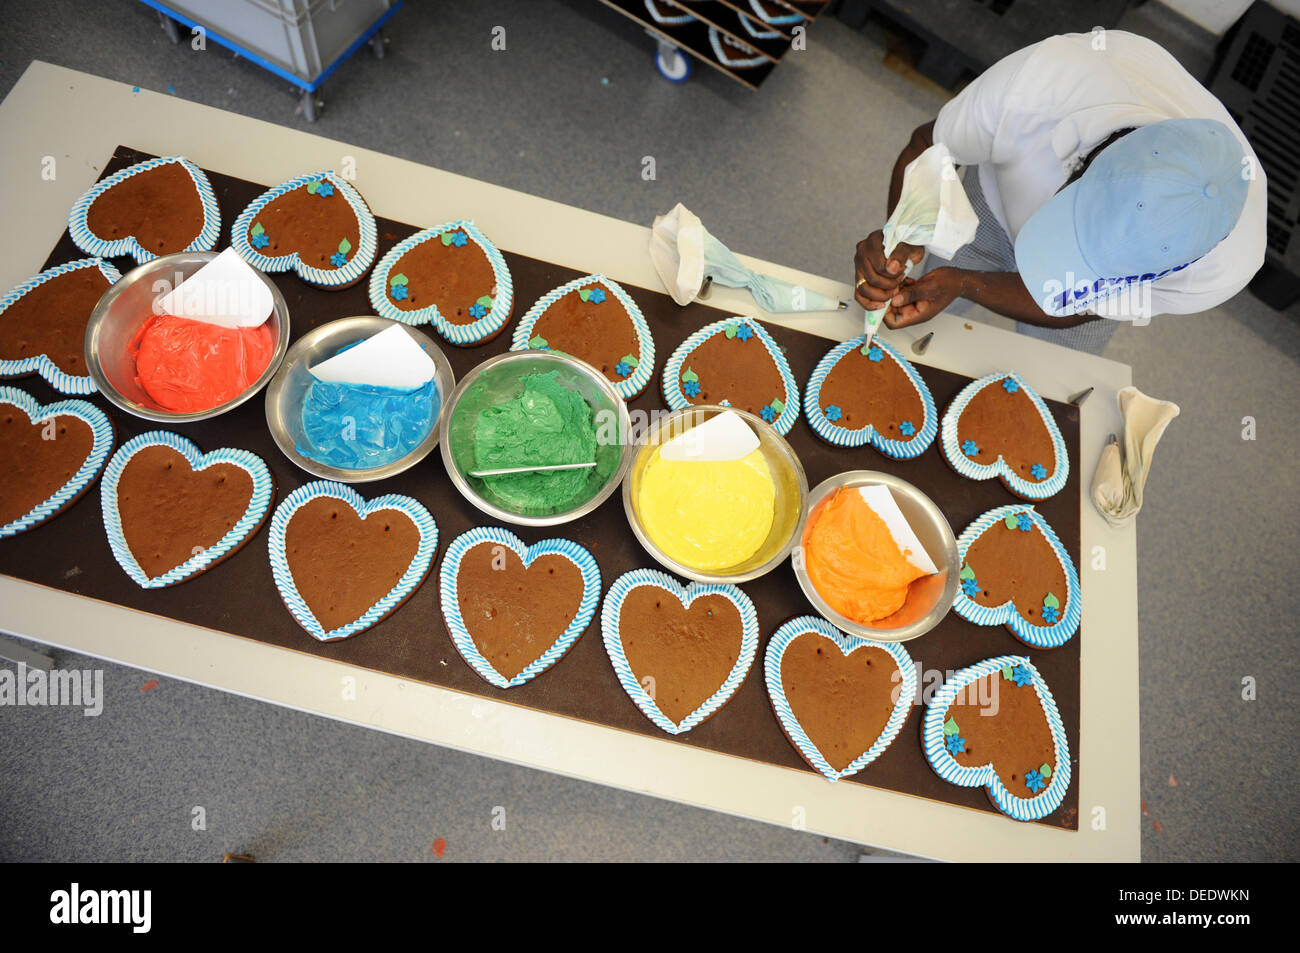 An employee of the company Zuckersucht decorates gingerbread hearts in Aschheim near Munich, Germany, 06 September 2013. The company is the biggest gingerbreas heart producer for the Oktoberfest. During peak times, like before the Wiesn, the company produces 40,000 gingerbread hearts a day. The complete production is handwork. Photo: ANDREAS GEBERT Stock Photo